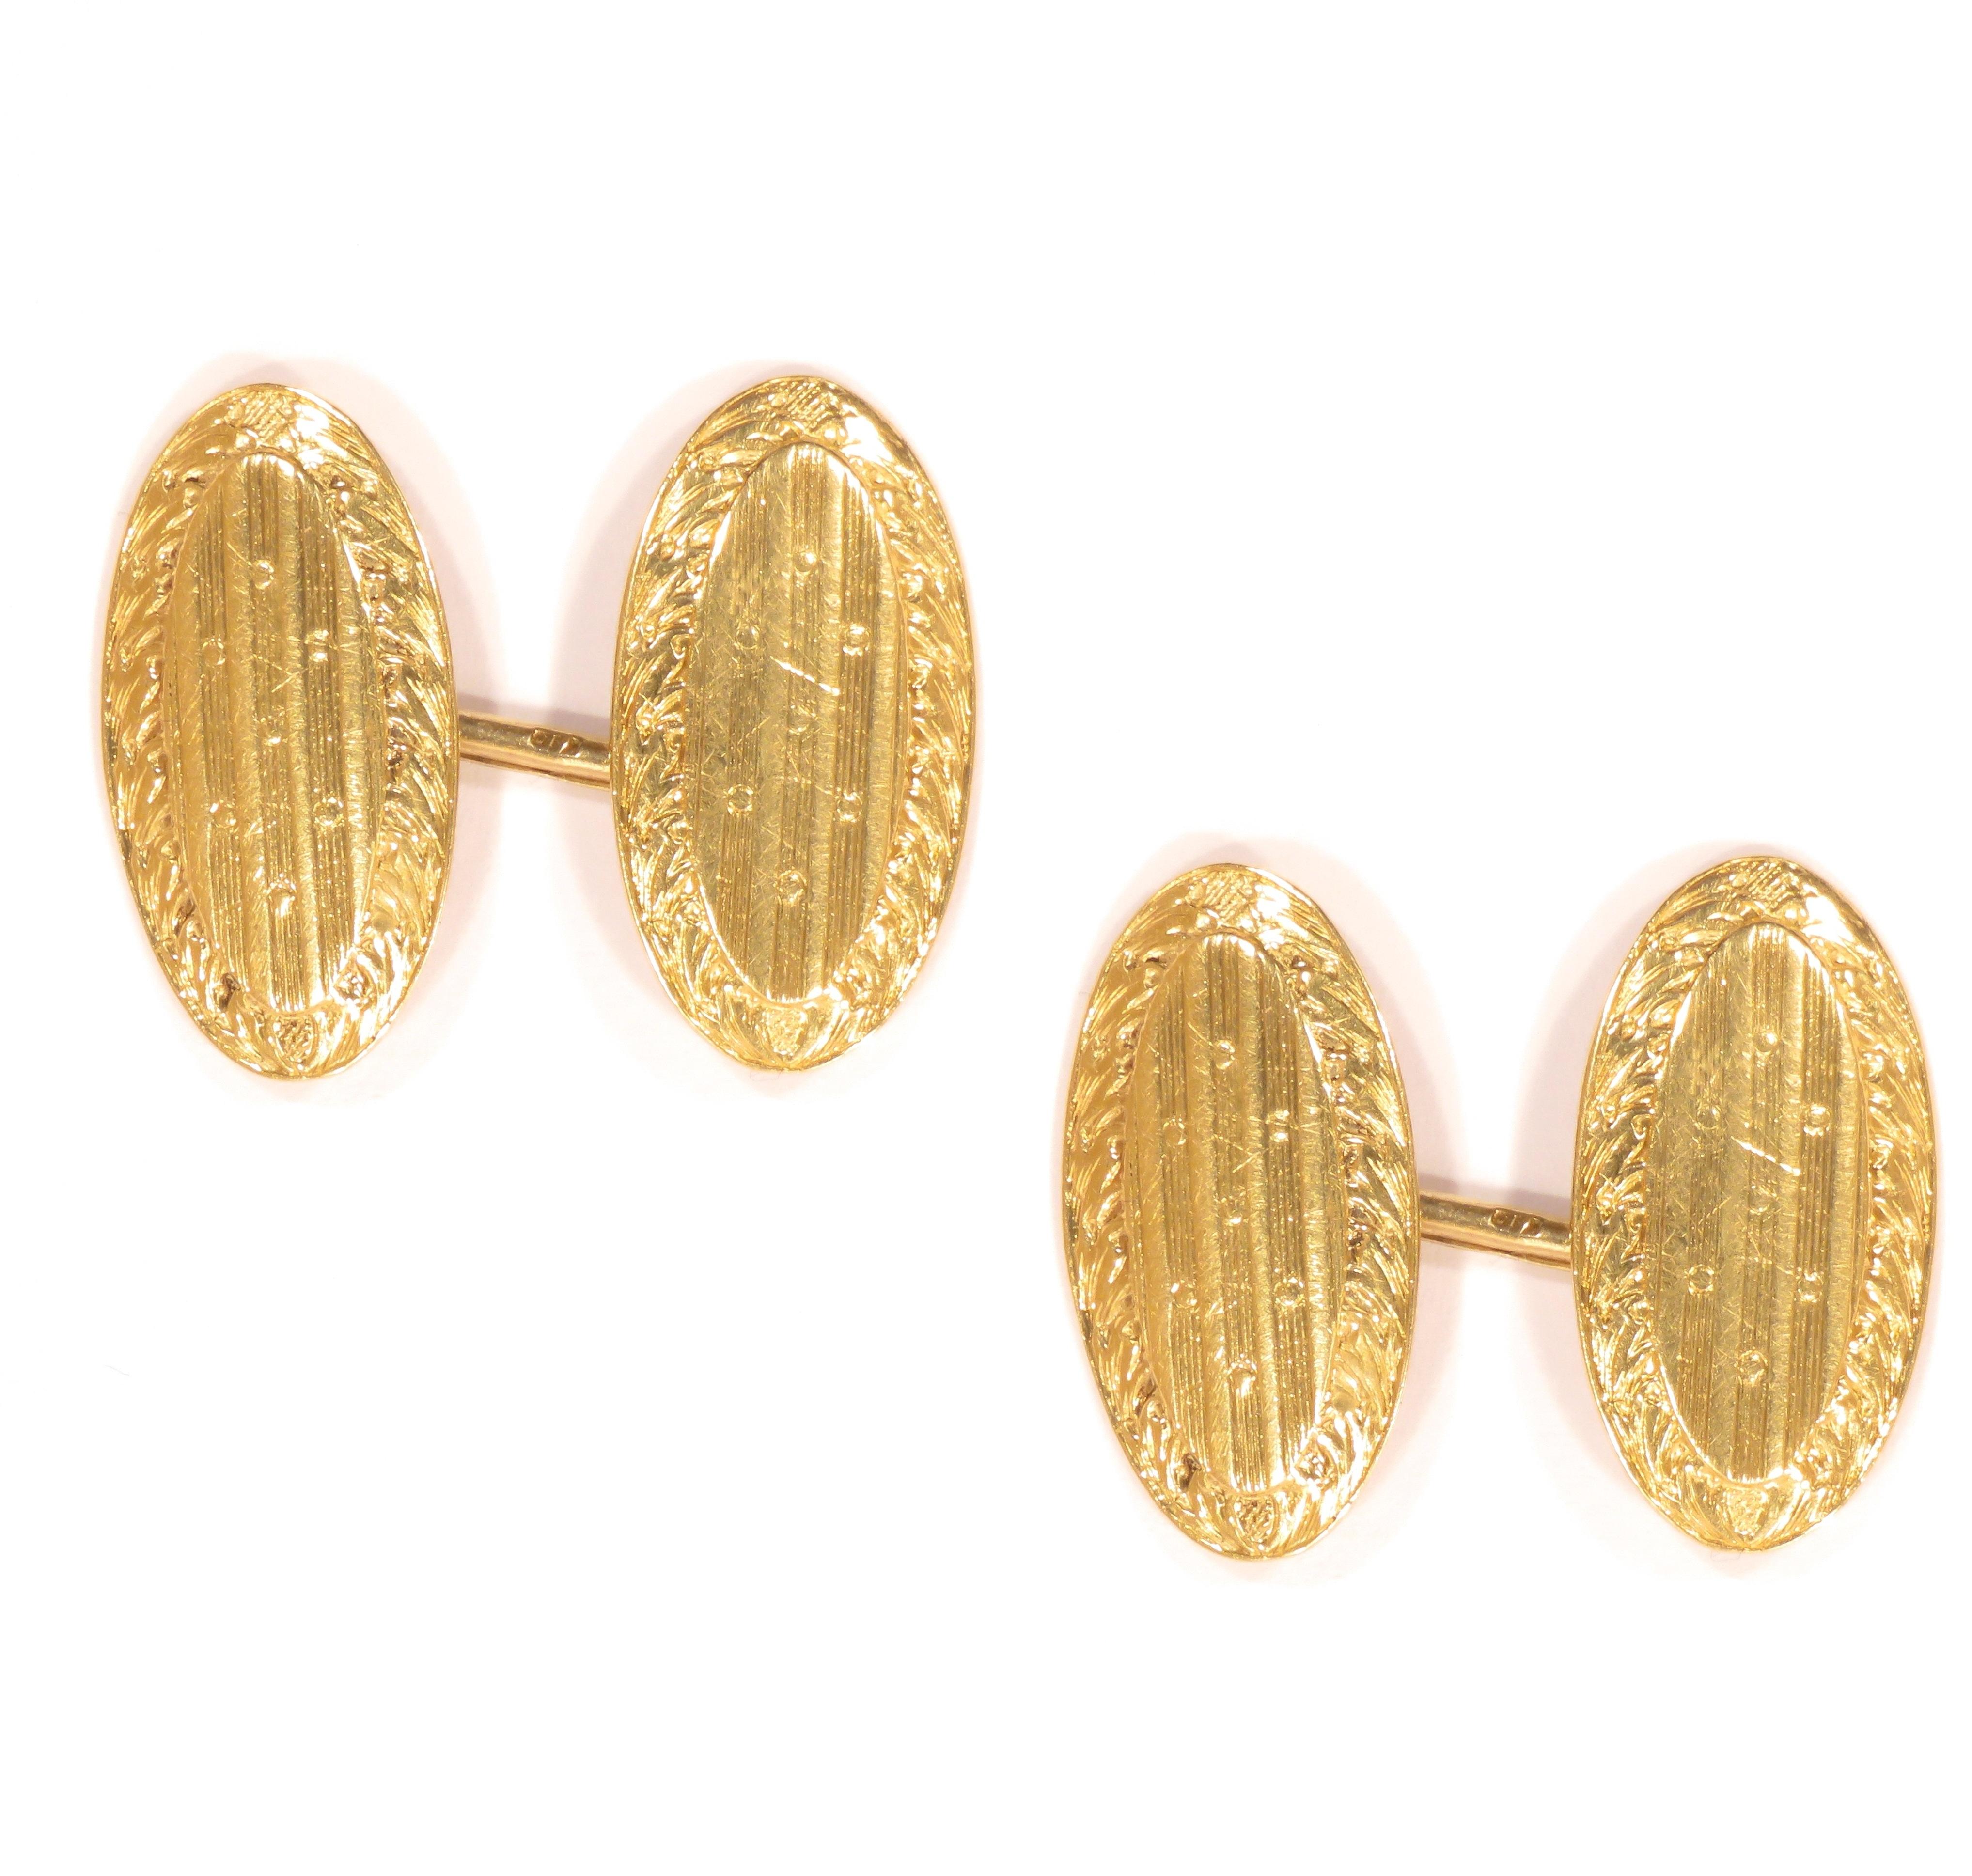 18k gold oval shaped engraved cufflinks.
Ovals are 22 X 12 millimeters / 0,866142 X 0,472441 inches
Ready for delivery. It can be shipped with express delivery on